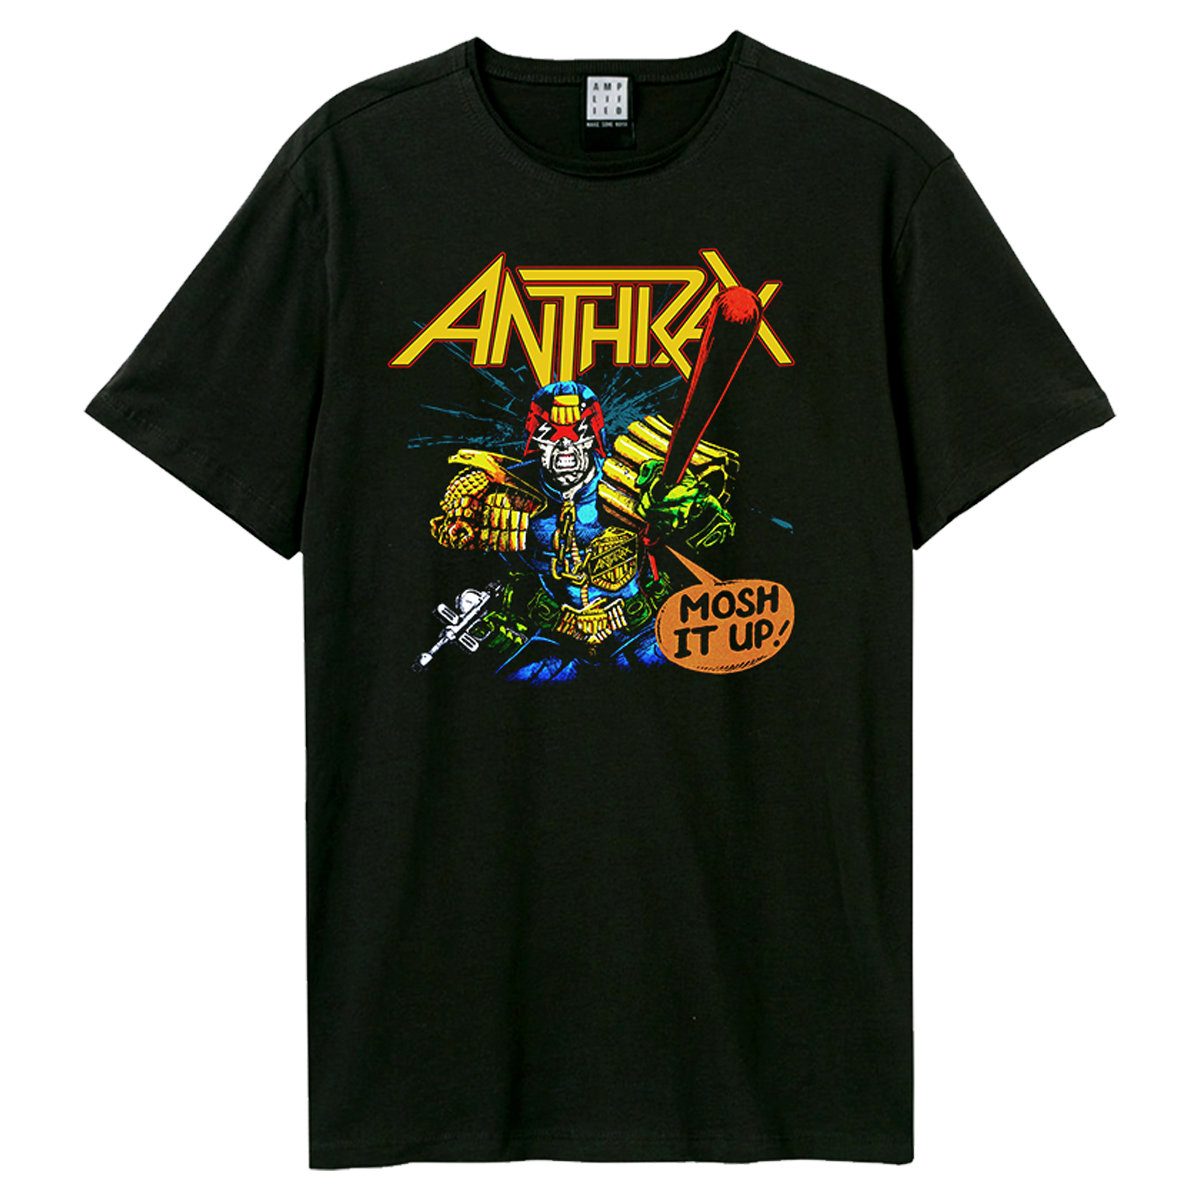 Anthrax I Am The Law